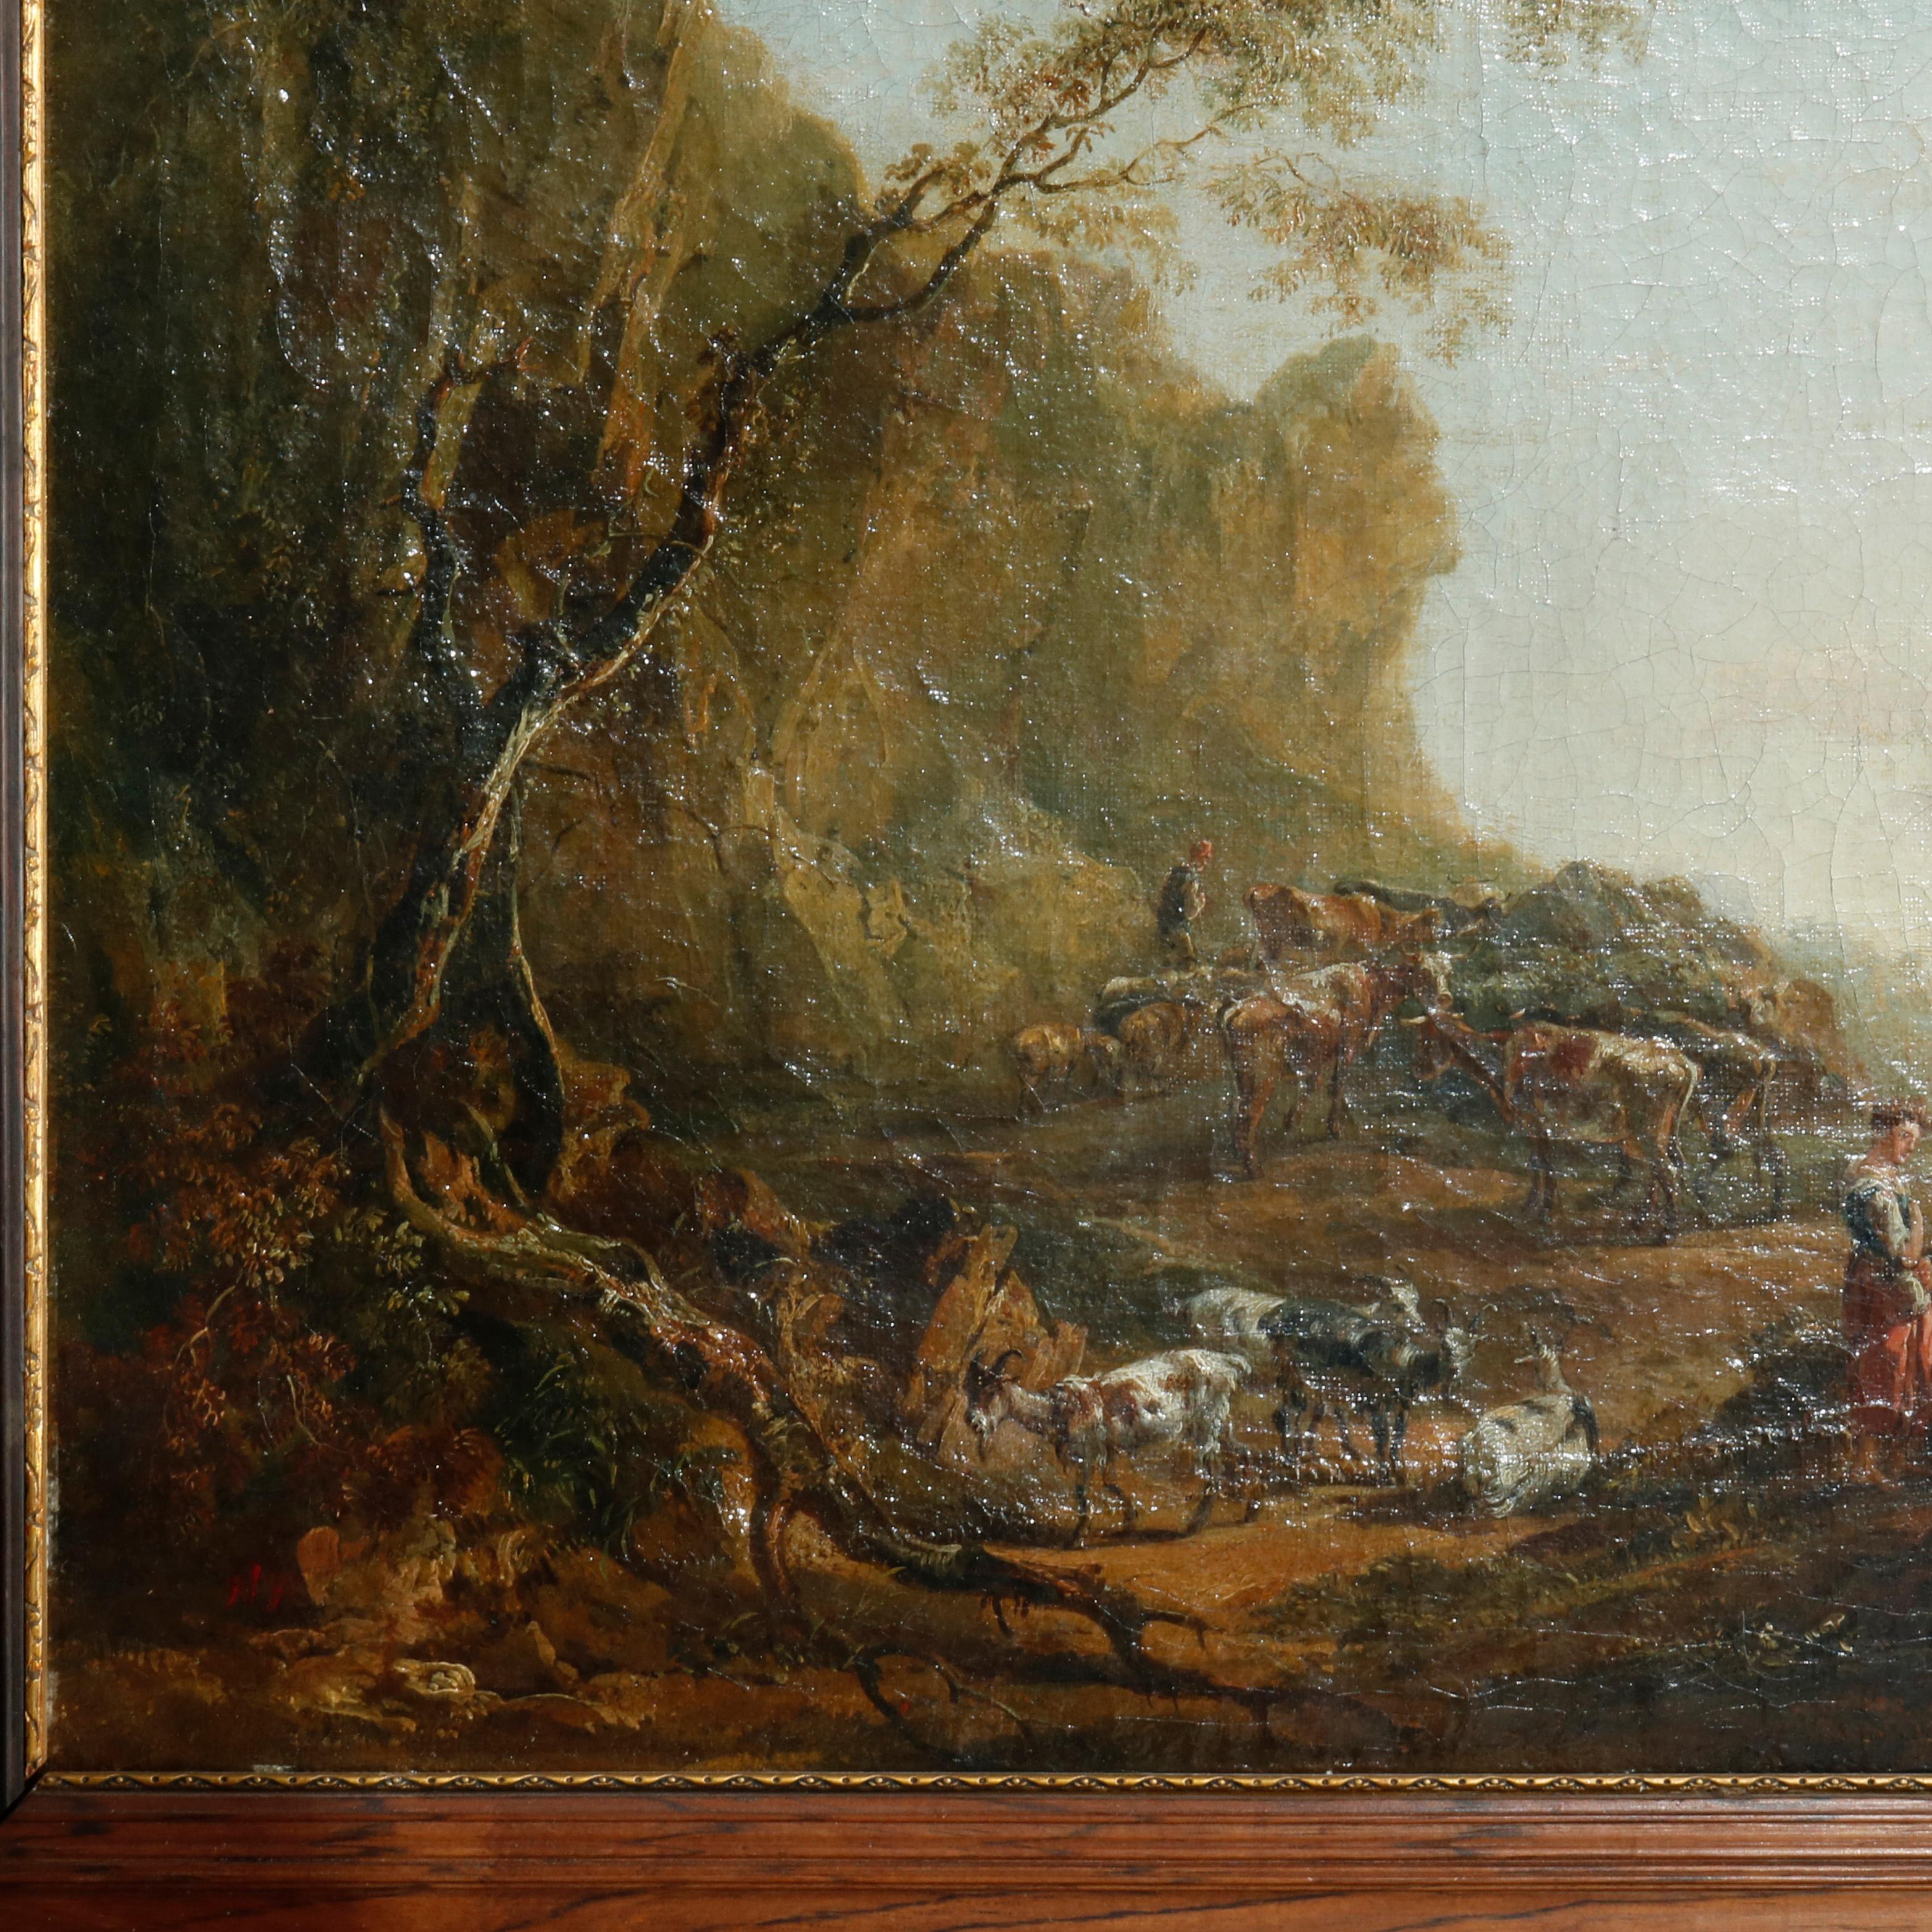 An antique European oil on canvas painting depicts mountainous landscape with figures and livestock including cattle and goats, seated on parcel gilt rosewood frame, mid 19th century

Measures: 19.5